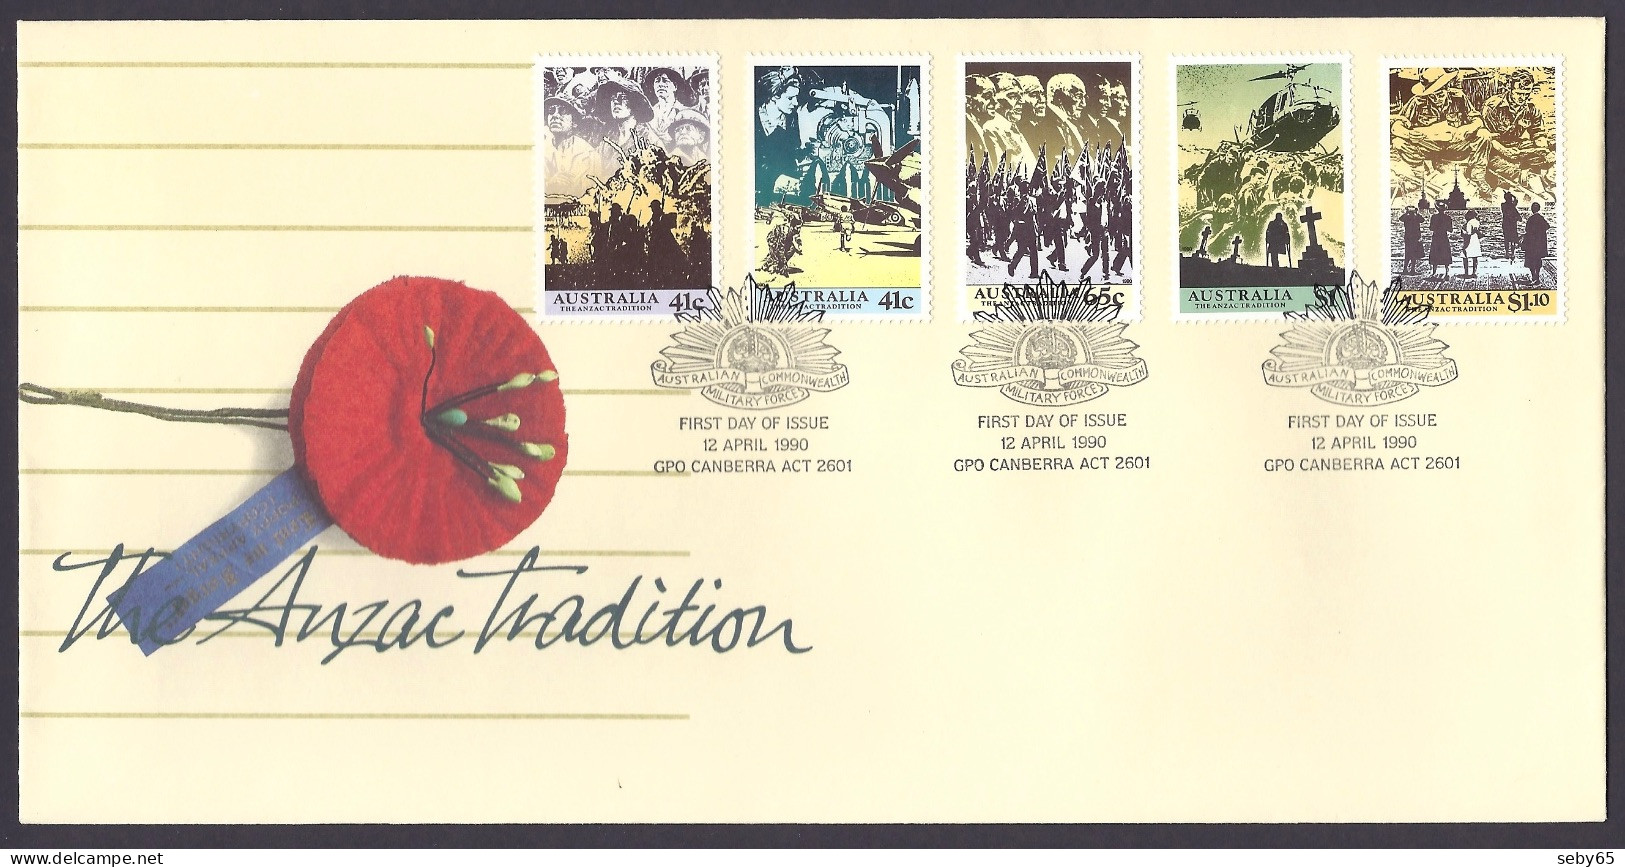 Australia 1990 - The Anzac Tradition, War, Troops, Landing, Army, Military - FDC - FDC